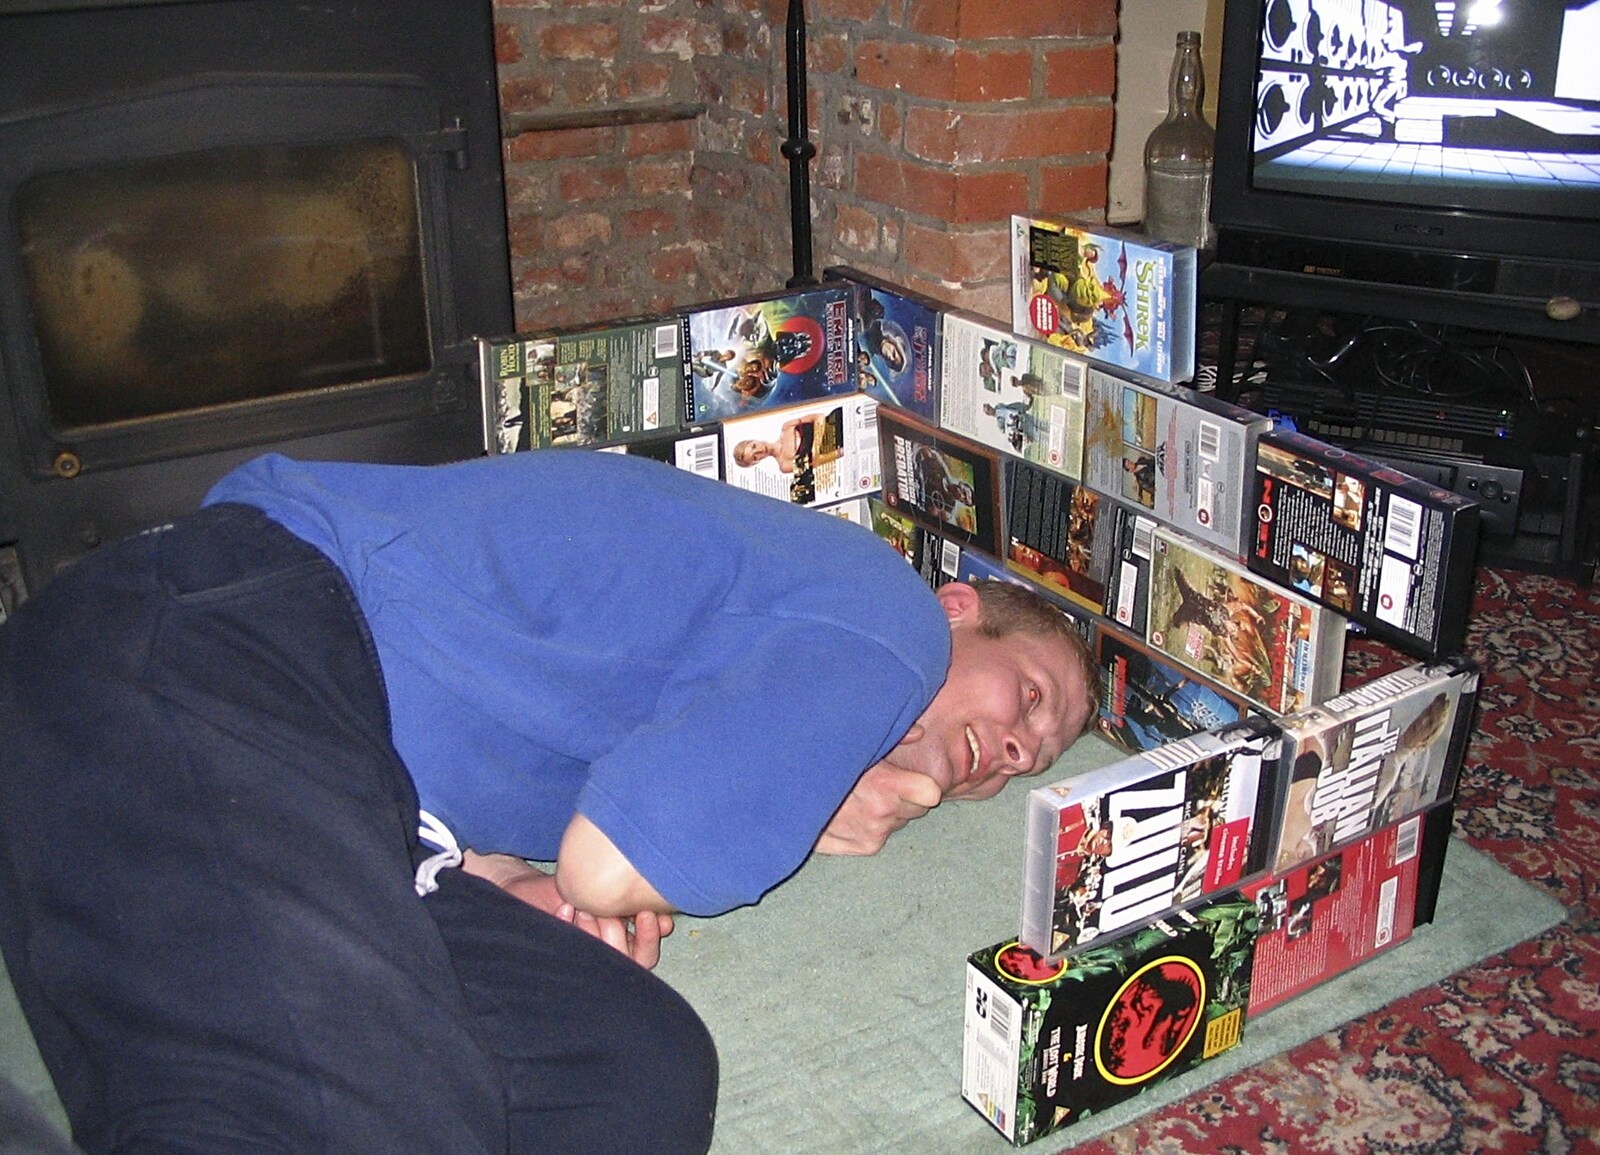 Bill enjoys his fort made of VHS cases from A French Market, Blues and Curry, Diss, Scole and Brome - 17th October 2004